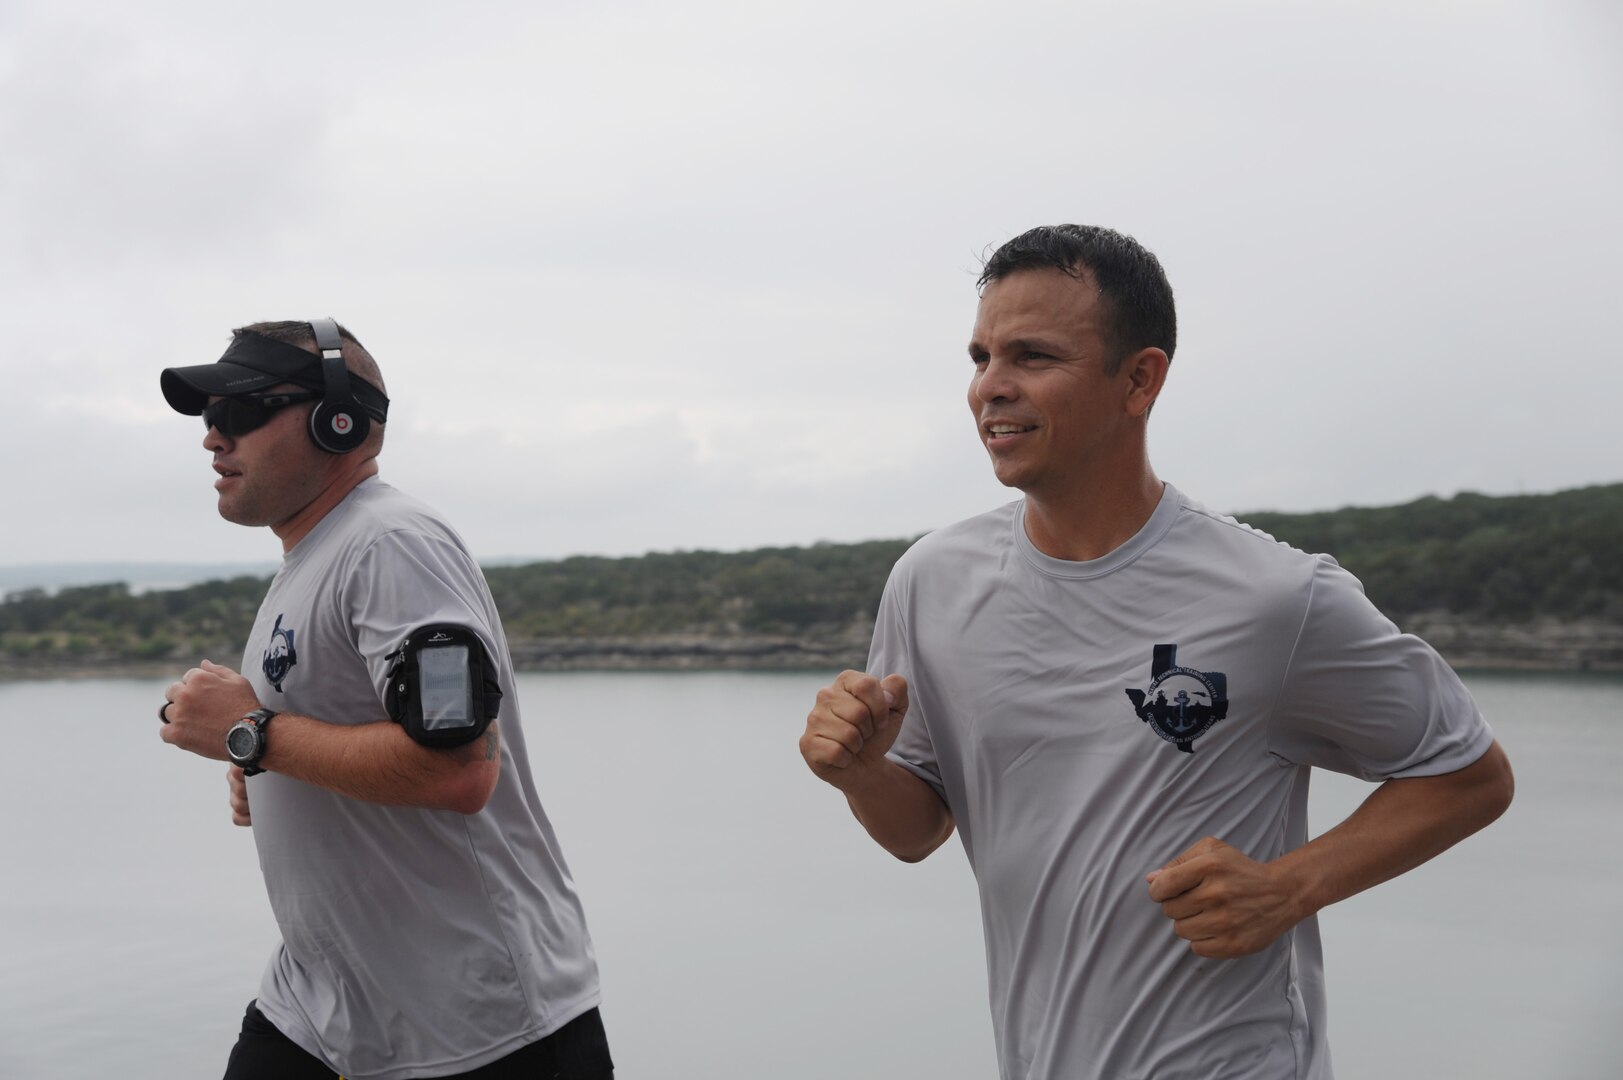 Rambler 120 participants run 6 miles following a 22-mile bike ride Sept. 20 at Canyon lake, Texas. After the run, the teams completed a 2-mile boat race. (U.S. Air Force photo by Senior Airman Krystal Jeffers/Released)